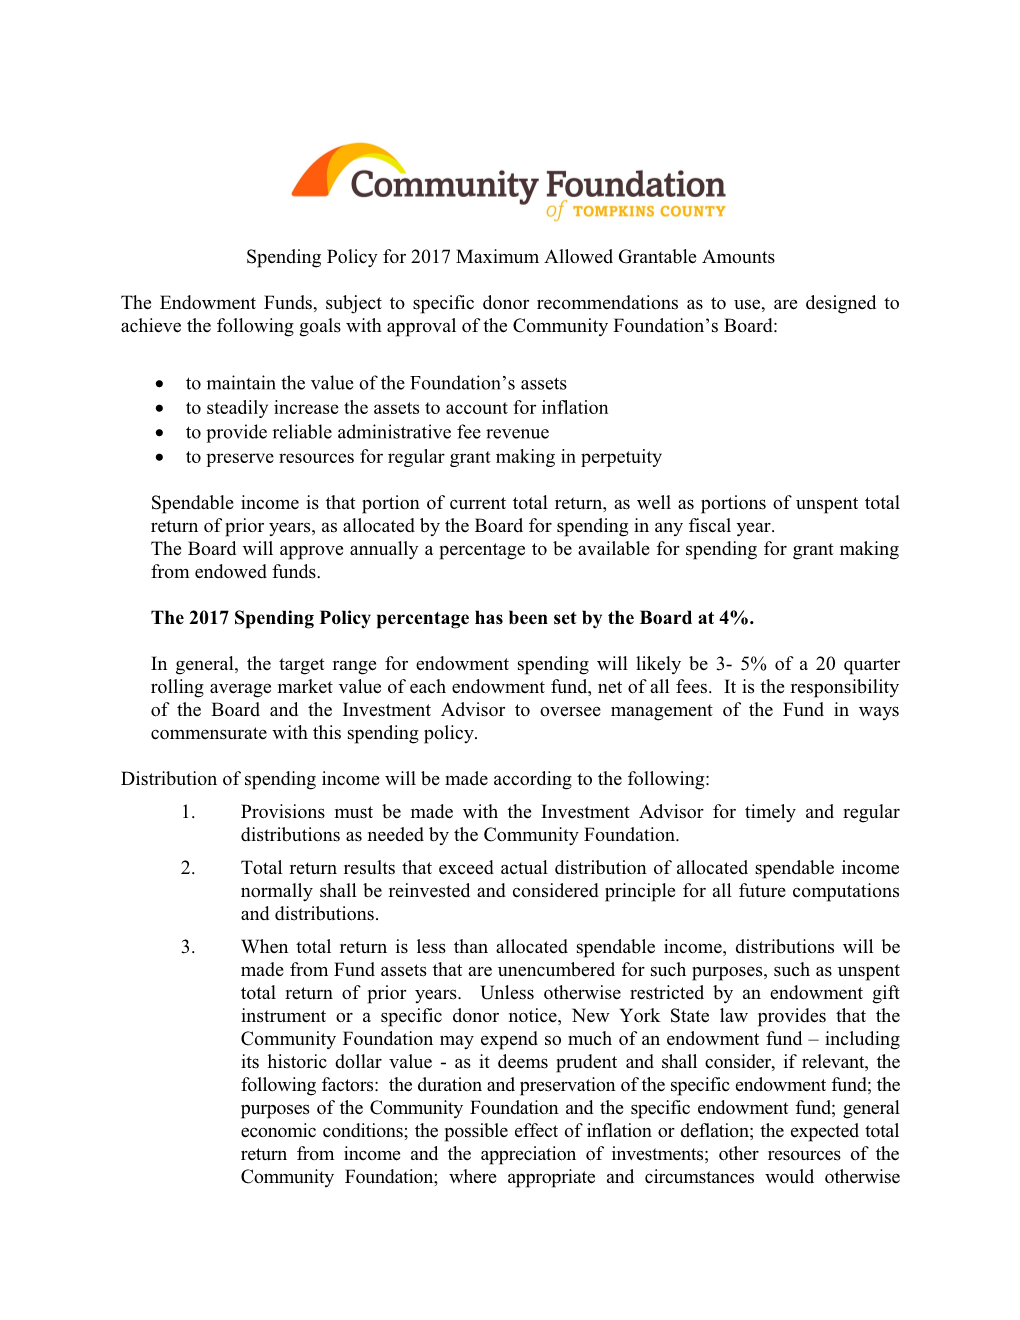 5-27-08 Draft Community Foundation Spending Policy